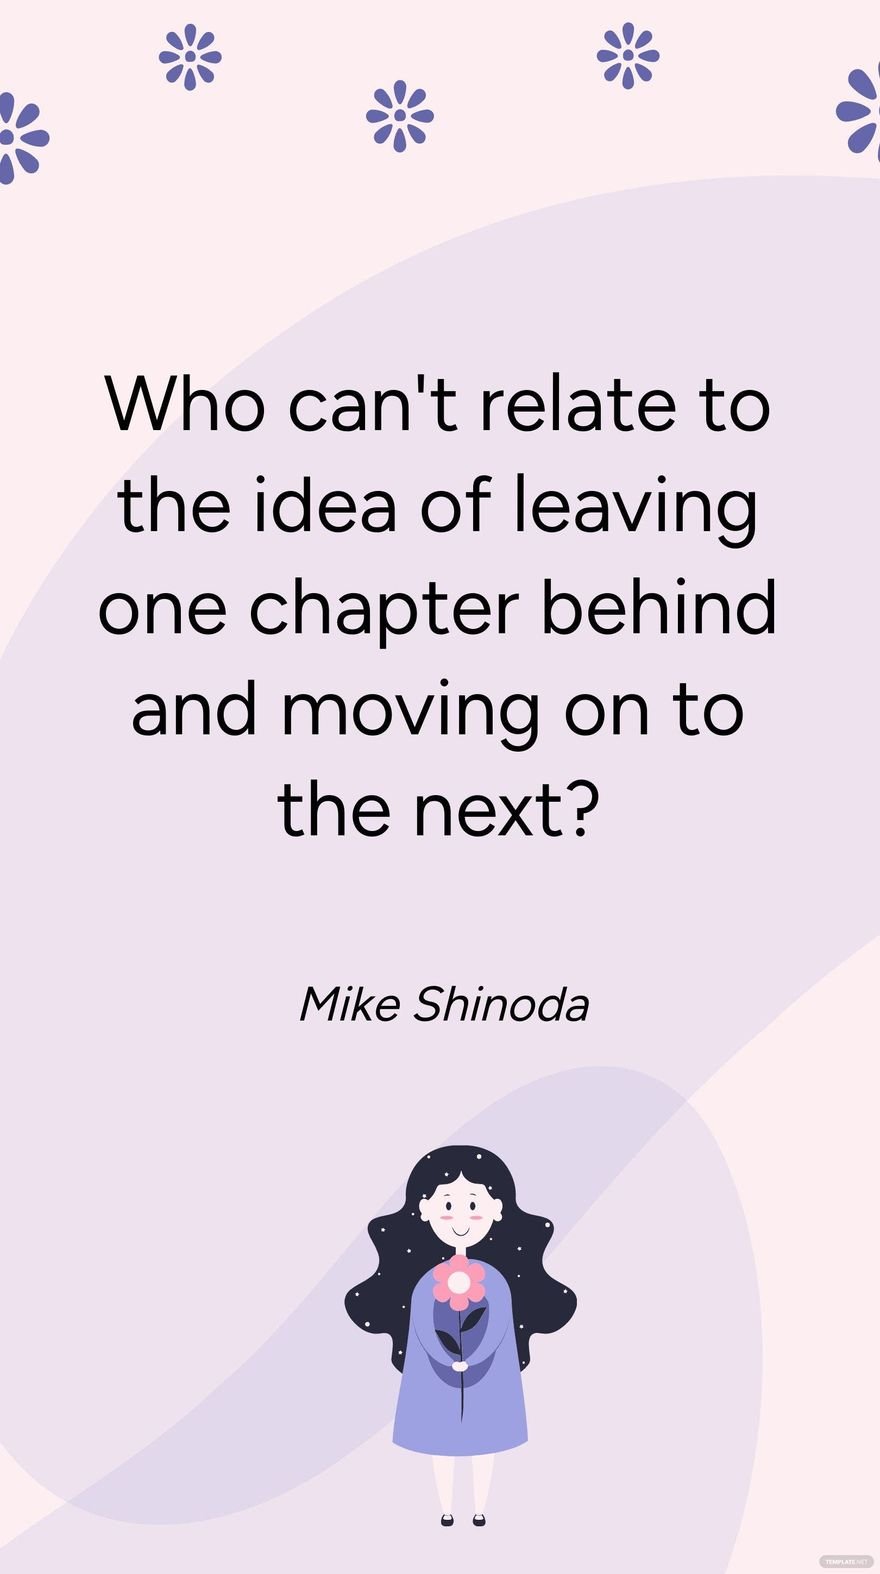 Free Mike Shinoda - Who can't relate to the idea of leaving one chapter behind and moving on to the next? in JPG